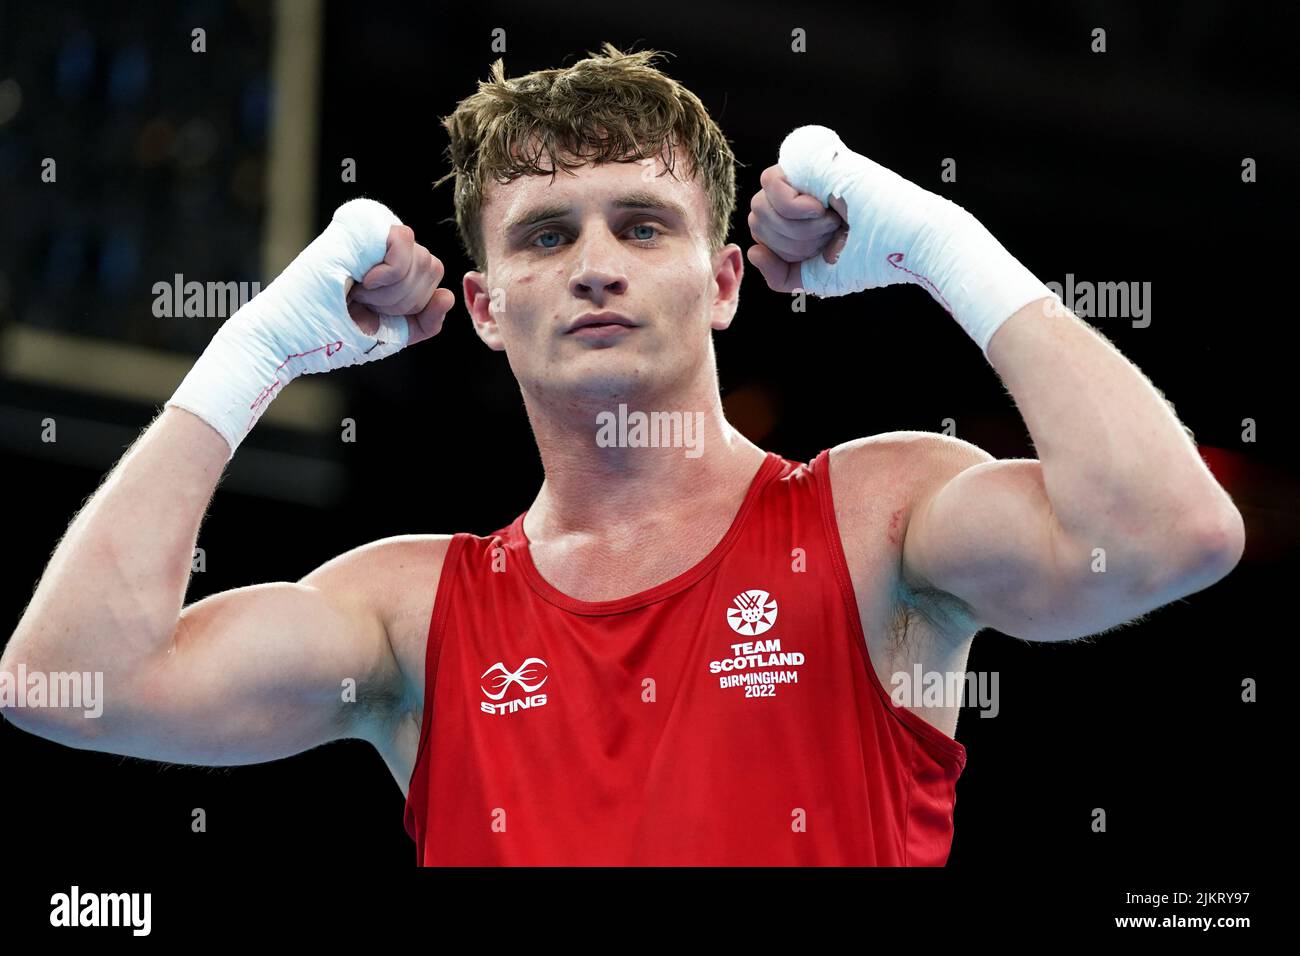 Scotland's Sam Hickey celebrates victory over Nigeria's Adeyinka Benson following the Men's Over 71kg-75kg (Middleweight) - Quarter-Final 2 at The NEC on day six of the 2022 Commonwealth Games in Birmingham. Picture date: Wednesday August 3, 2022. Stock Photo